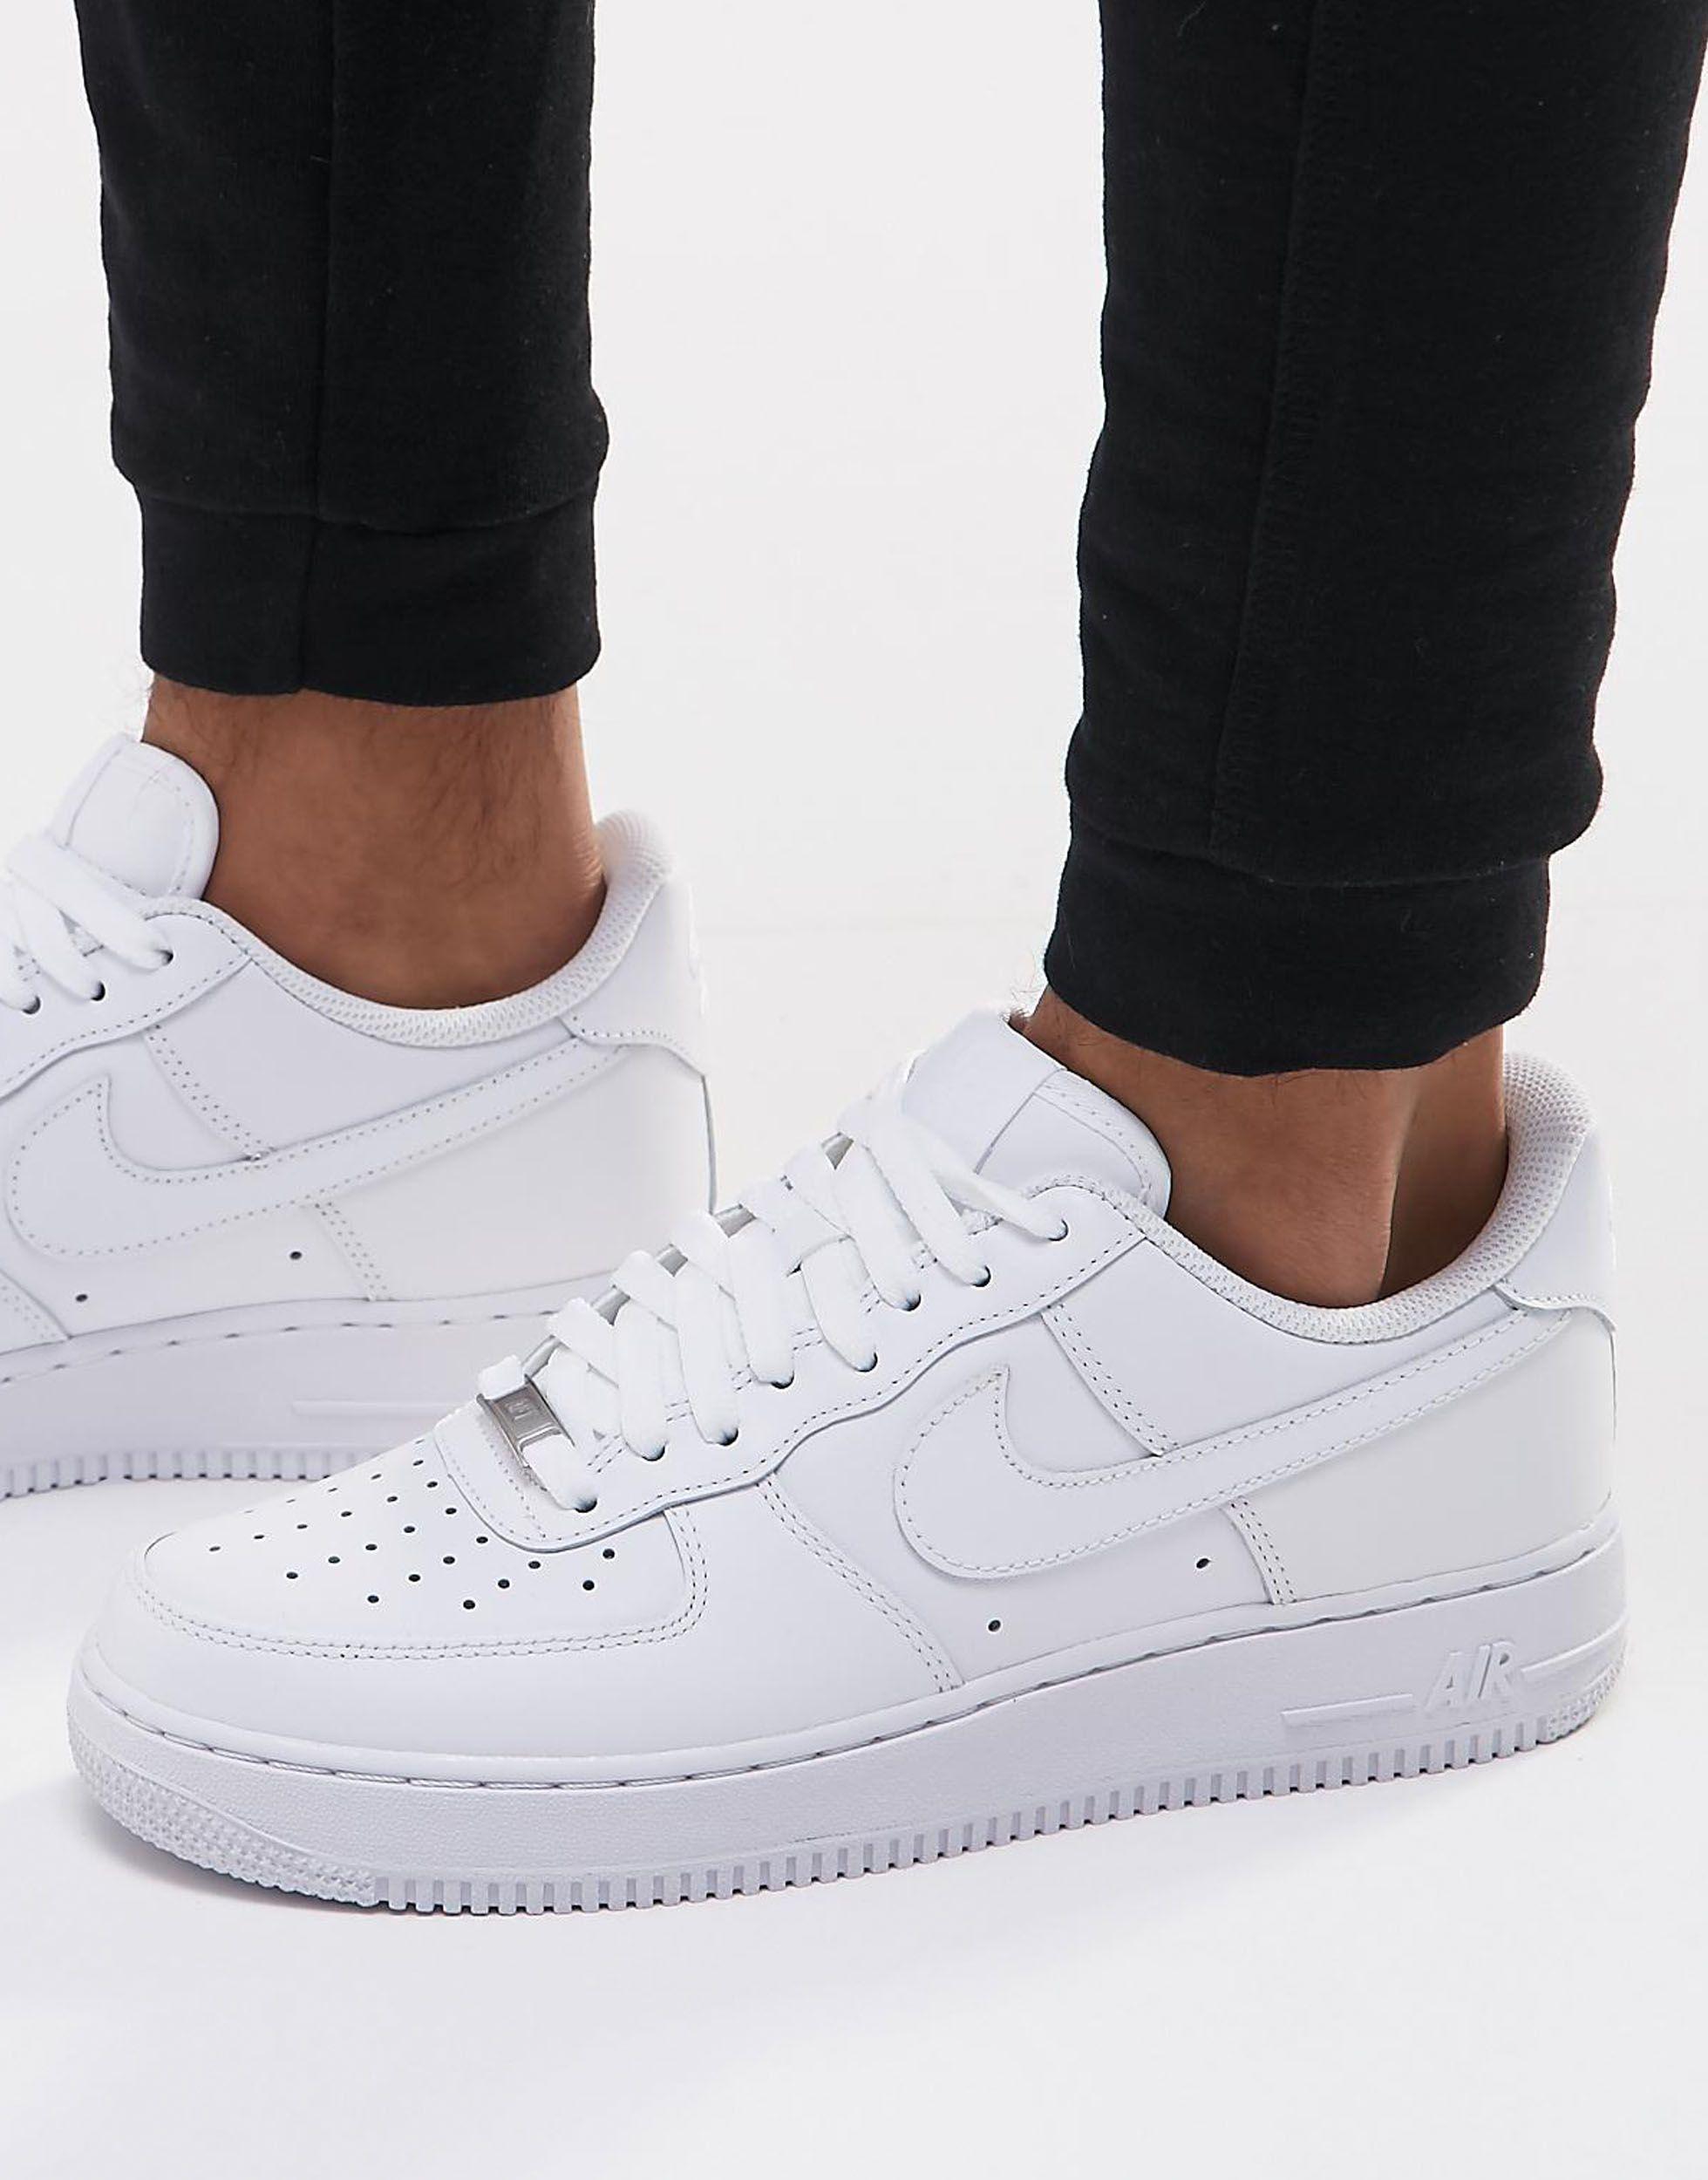 white air force ones low top mens